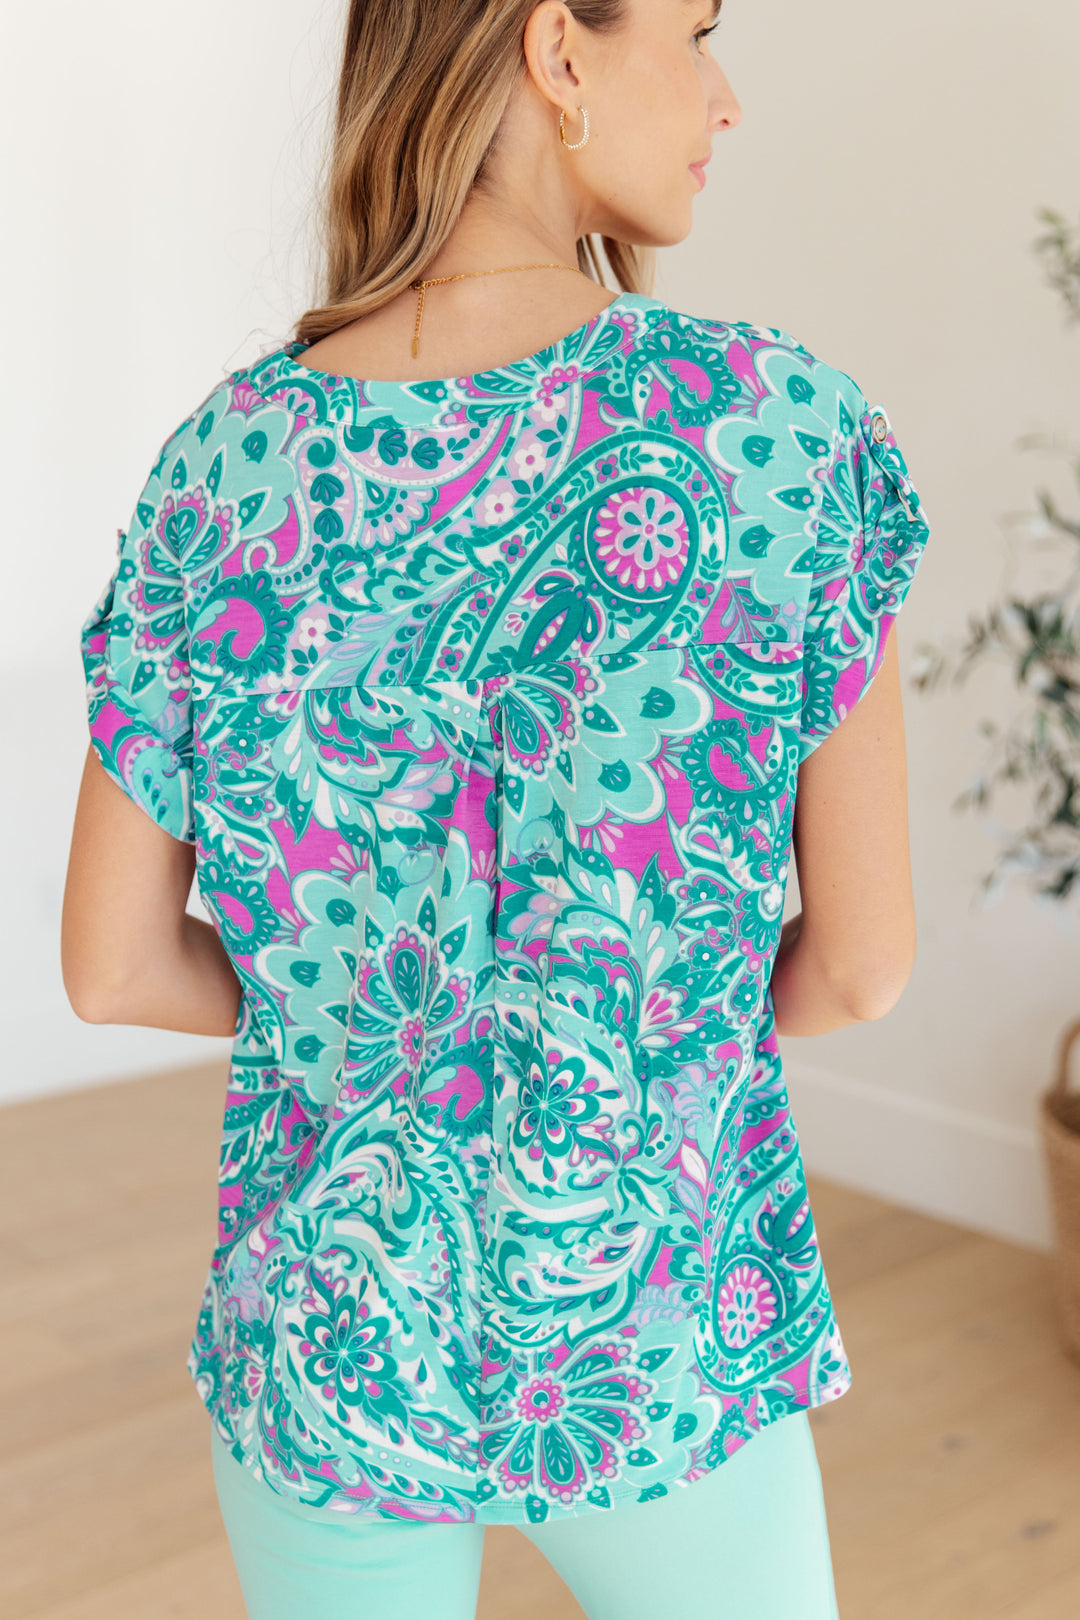 Lizzy Cap Sleeve Top in Magenta and Teal Paisley-Short Sleeve Tops-Inspired by Justeen-Women's Clothing Boutique in Chicago, Illinois